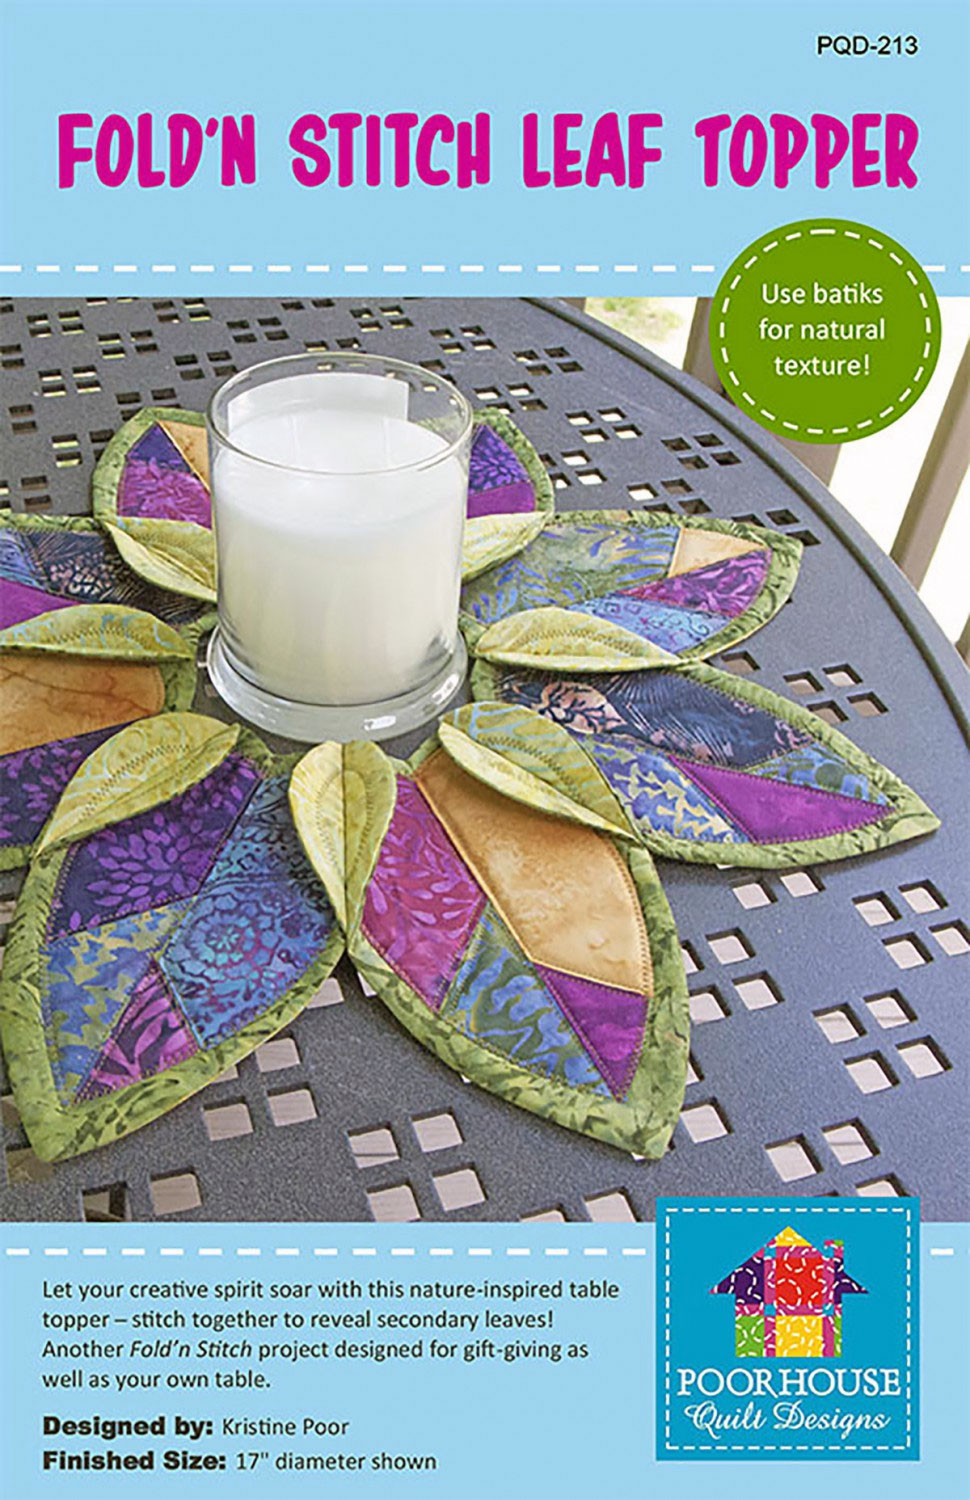 Fold-and-Stitch-Leaf-Topper-sewing-pattern-Poorhouse-Designs-front